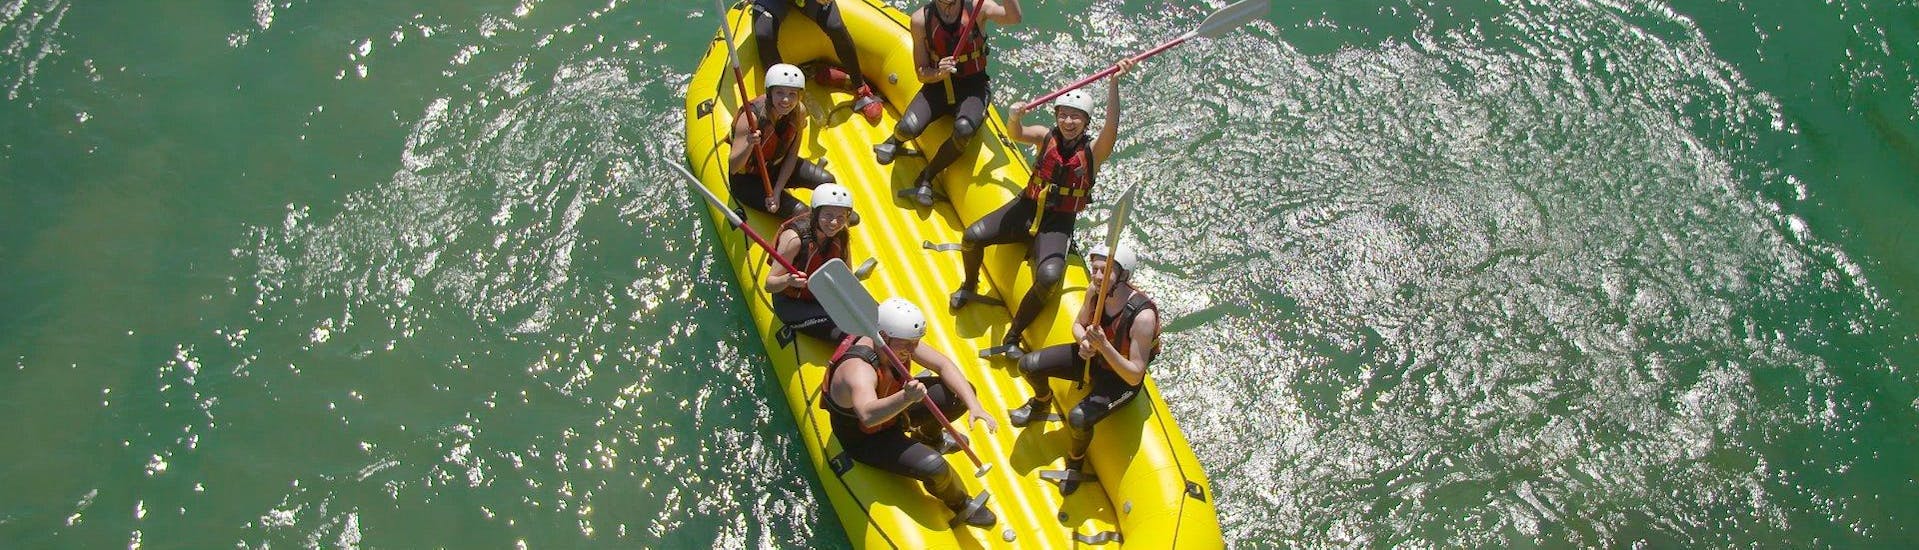 Participants having fun in a canyon at Jerecica Gorge during canyoning and rafting from Bled with Fun Turist Bled.